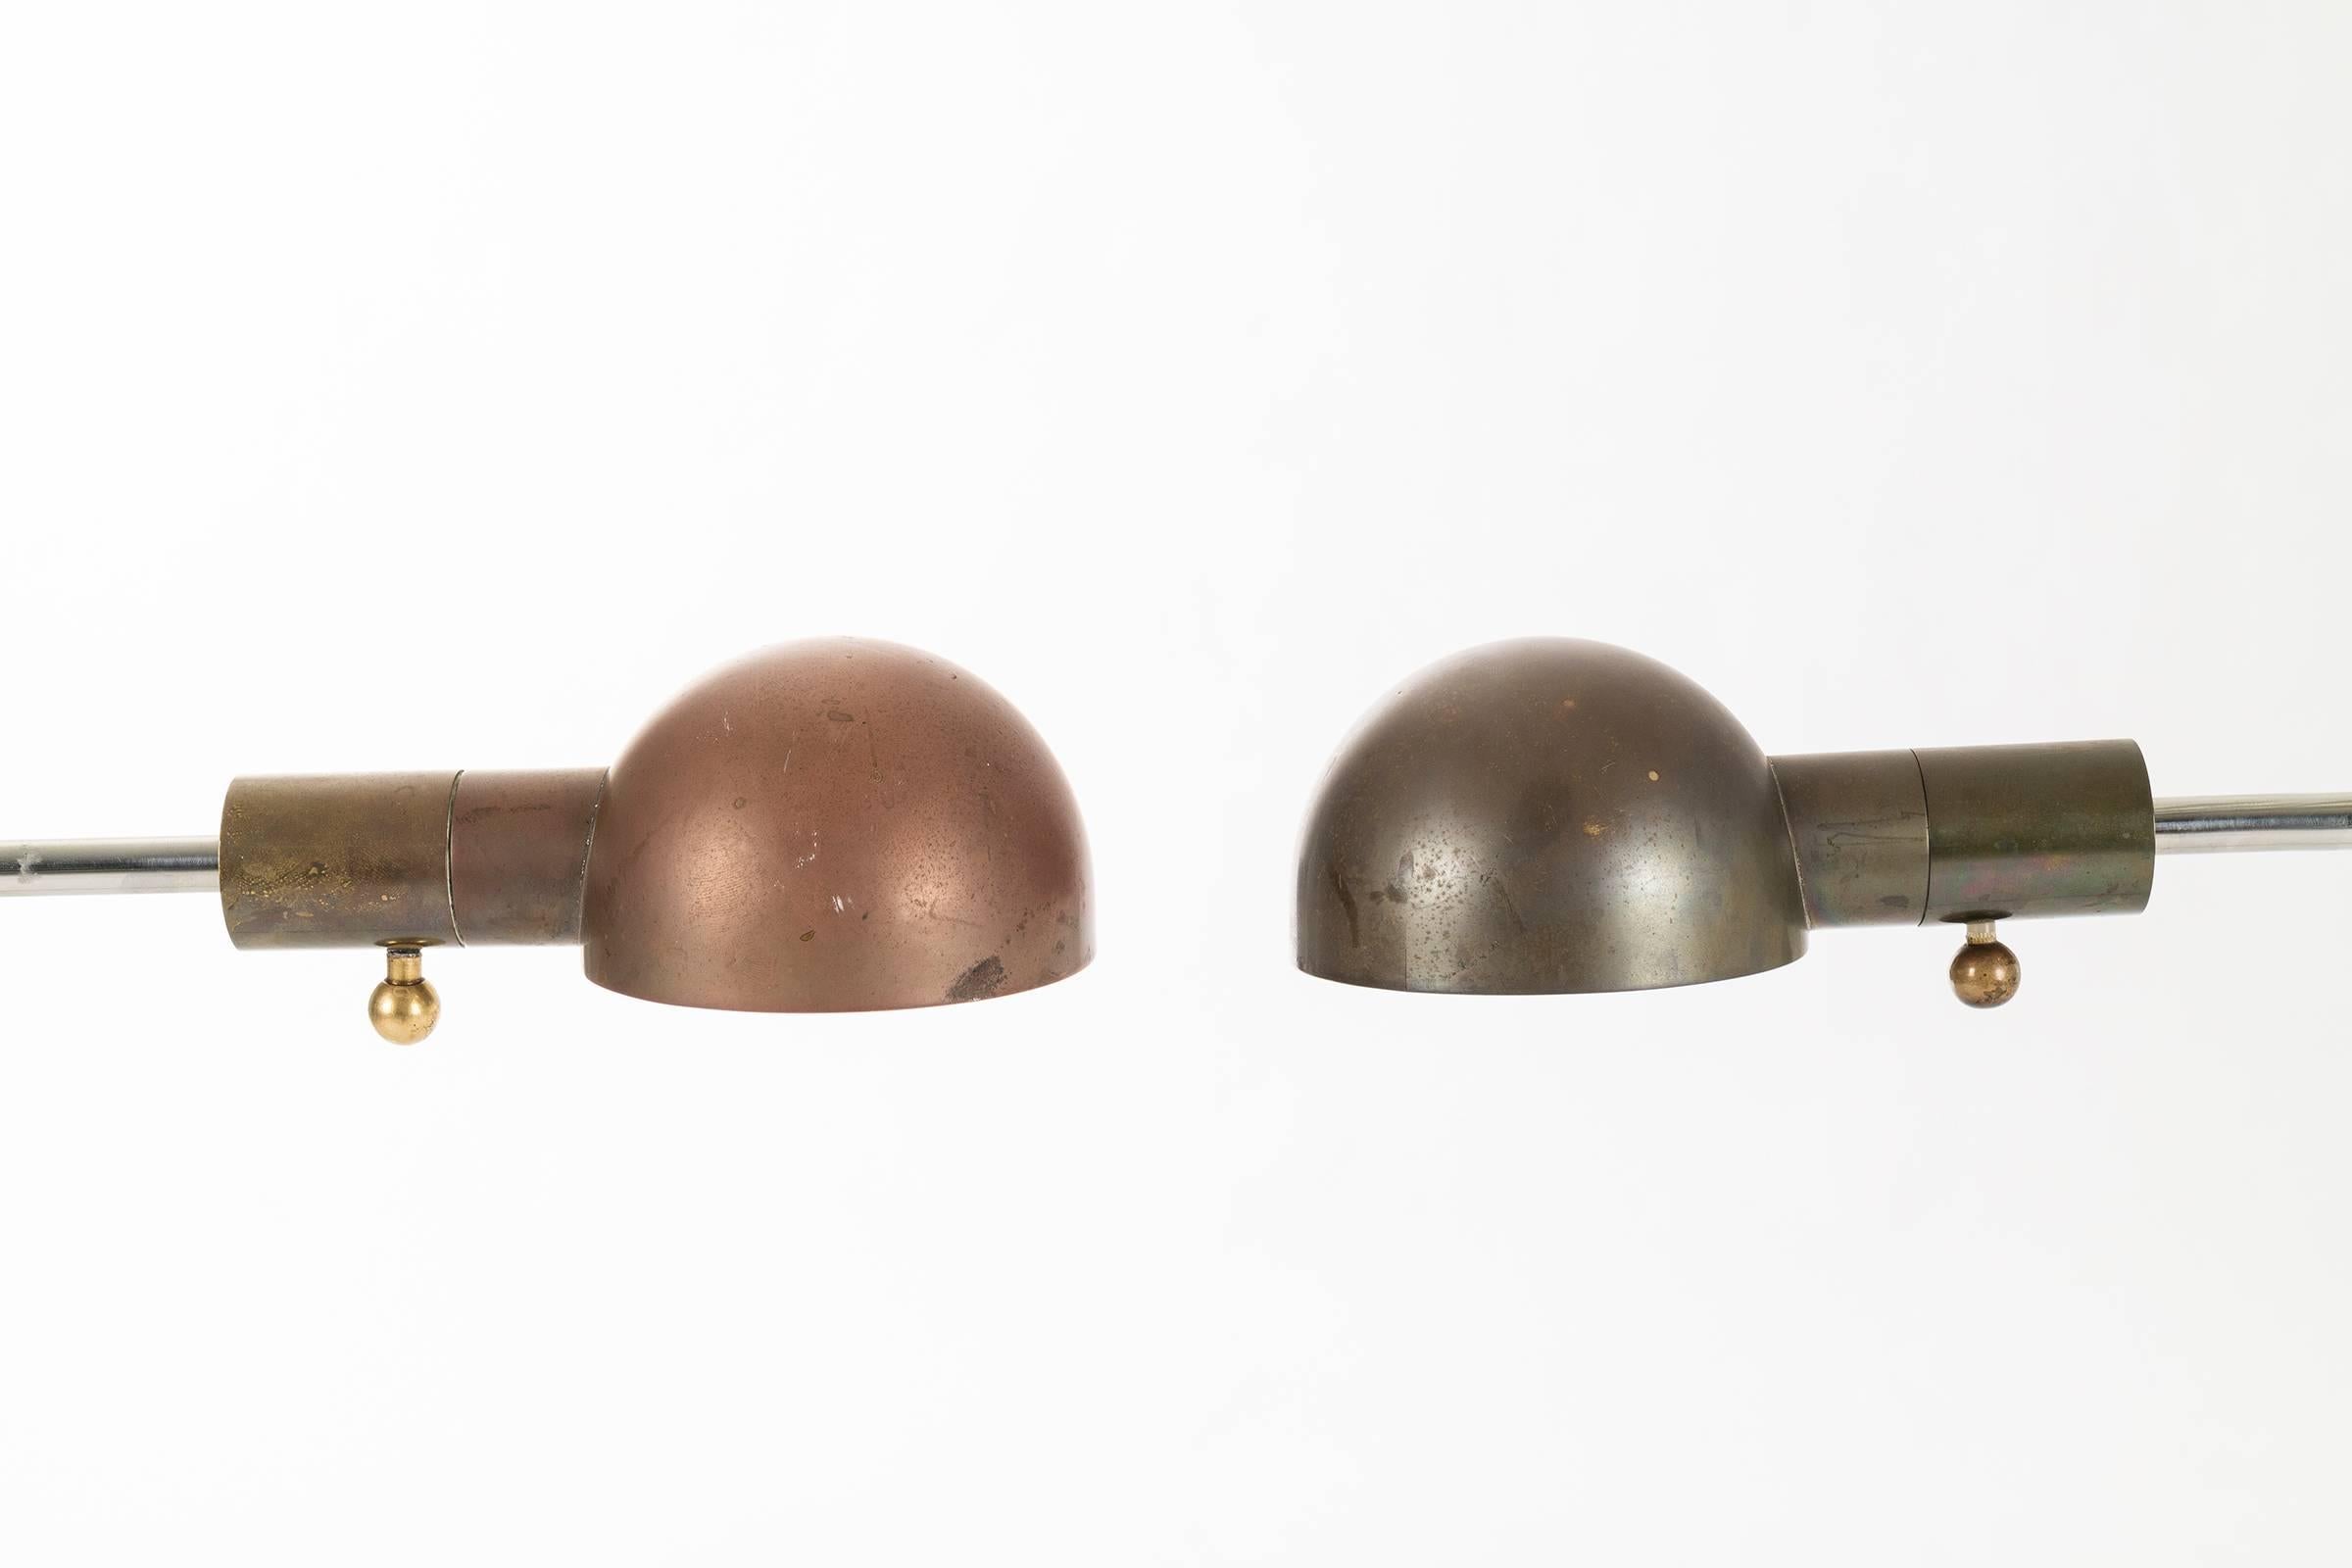 Pair of floor luminaires by Hartman. Can be adjusted in many directions. 33 inches minimum height and 49 inches maximum height. The brass shade swivels and is equipped with a dimmable socket. Different toned patinas on shades.